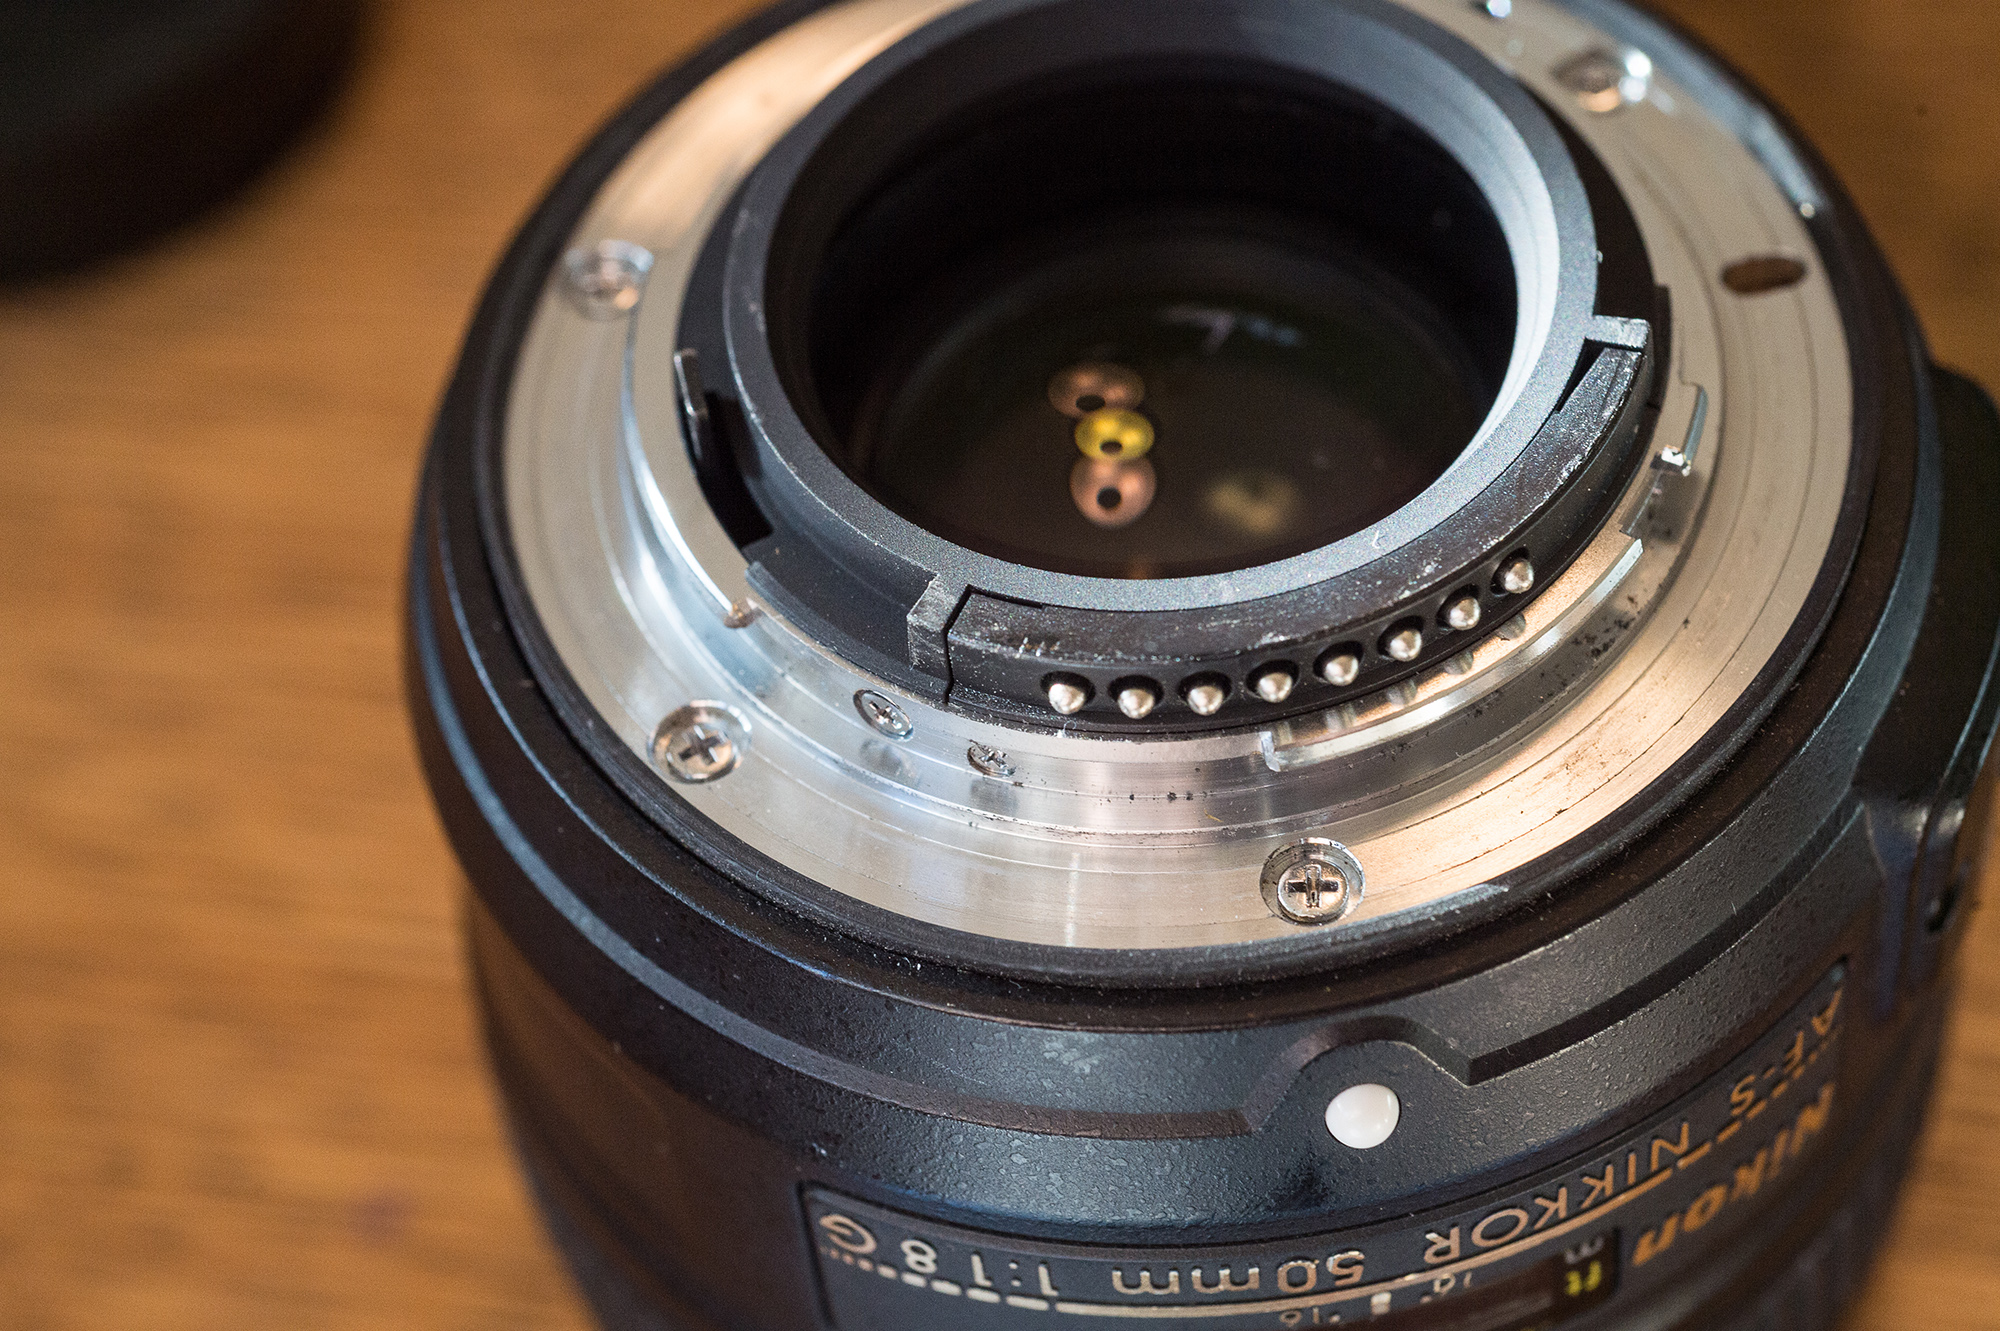 clean the back of the lens for proper camera lens care